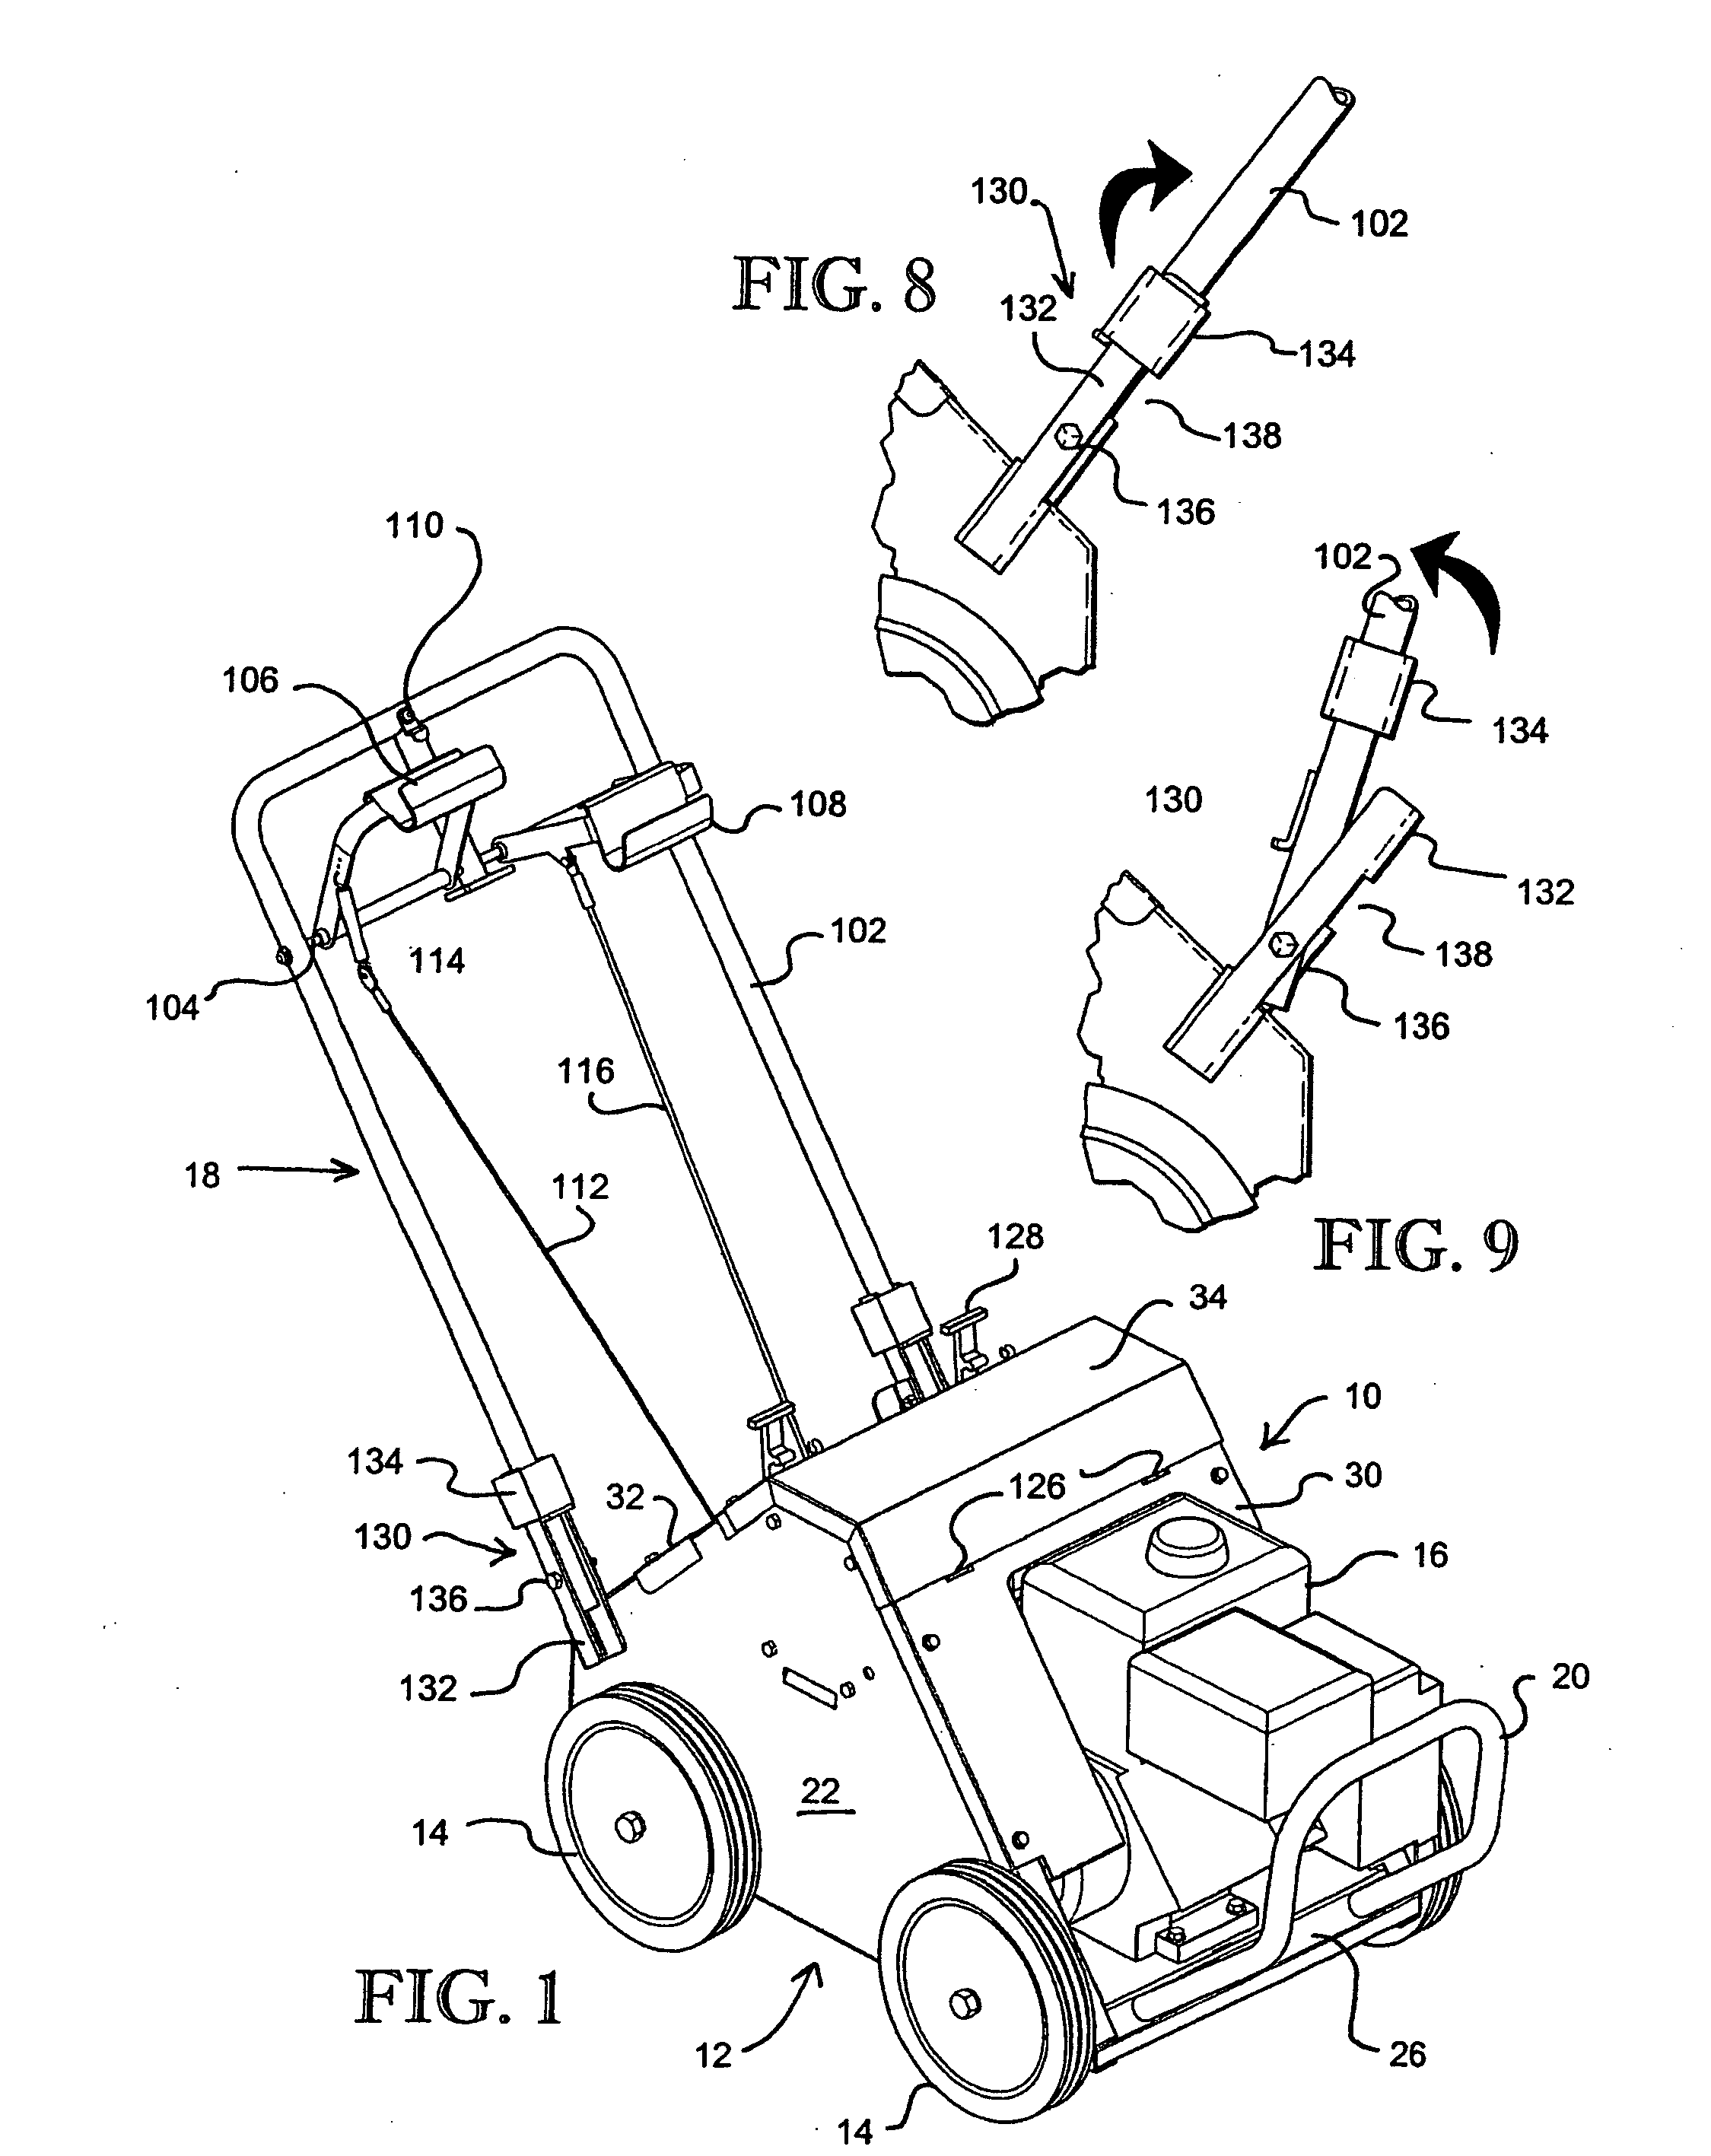 Turf aerator with unibody construction and reciprocating tines